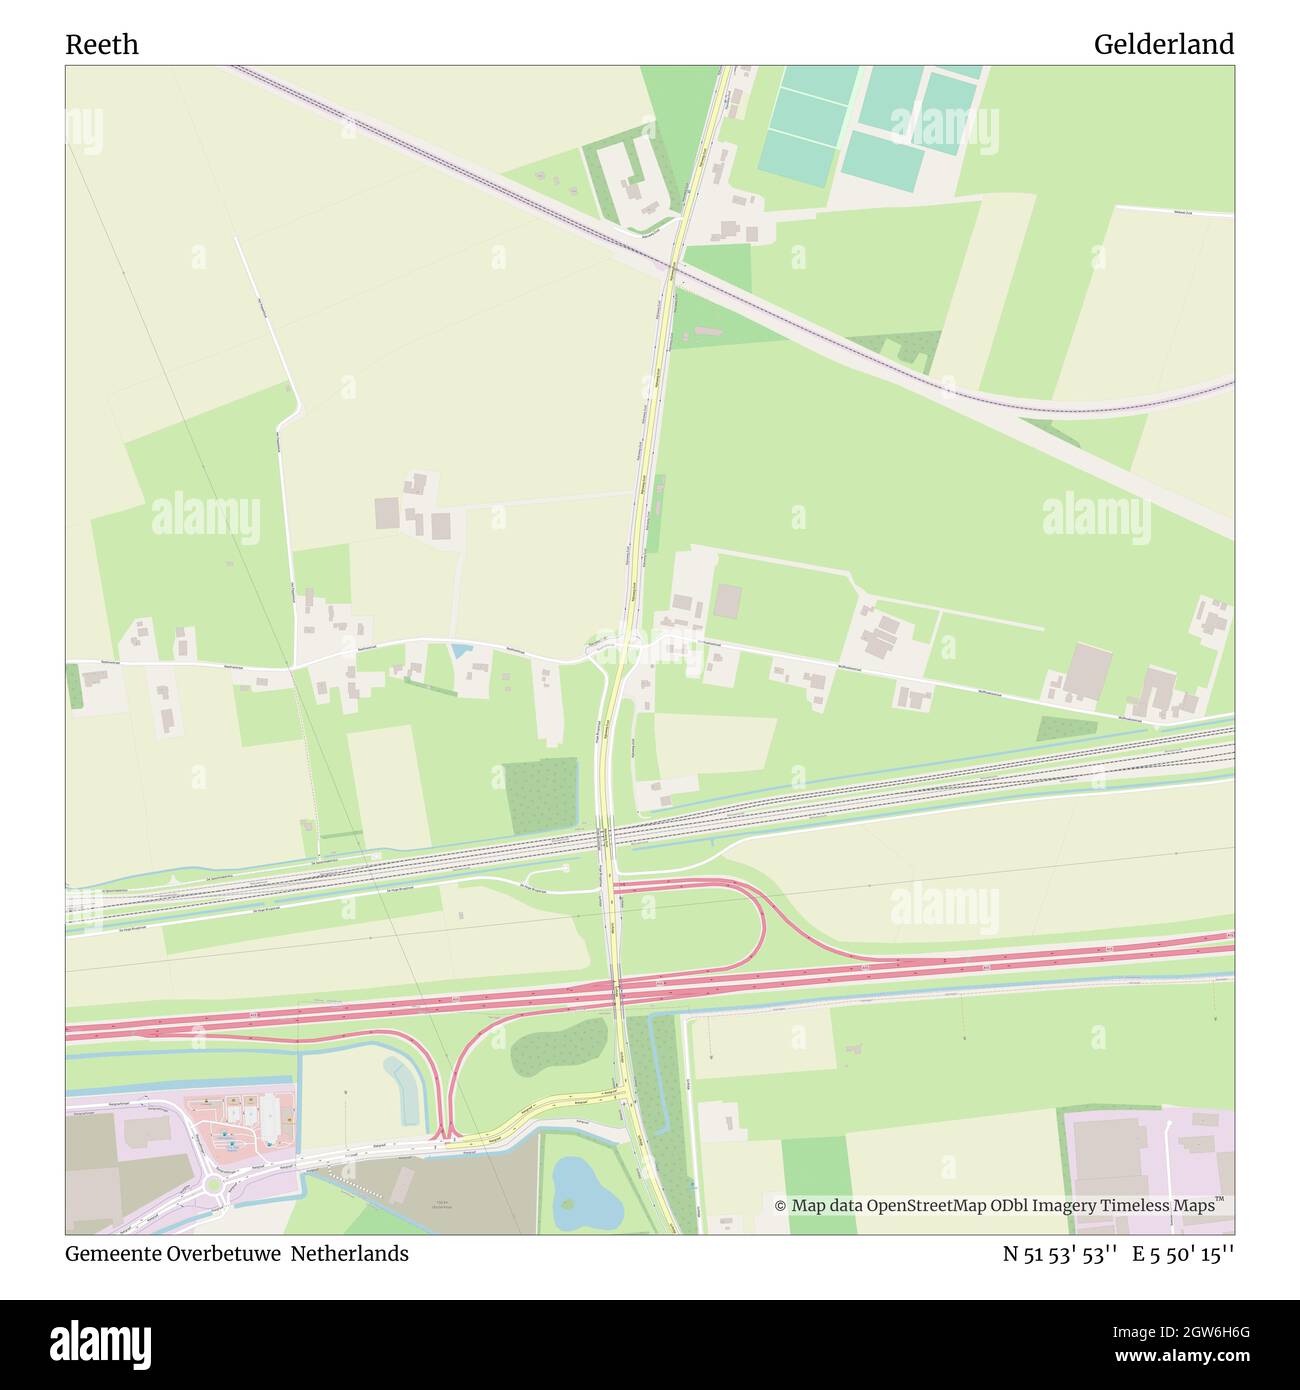 Reeth, Gemeente Overbetuwe, Netherlands, Gelderland, N 51 53' 53'', E 5 50' 15'', map, Timeless Map published in 2021. Travelers, explorers and adventurers like Florence Nightingale, David Livingstone, Ernest Shackleton, Lewis and Clark and Sherlock Holmes relied on maps to plan travels to the world's most remote corners, Timeless Maps is mapping most locations on the globe, showing the achievement of great dreams Stock Photo